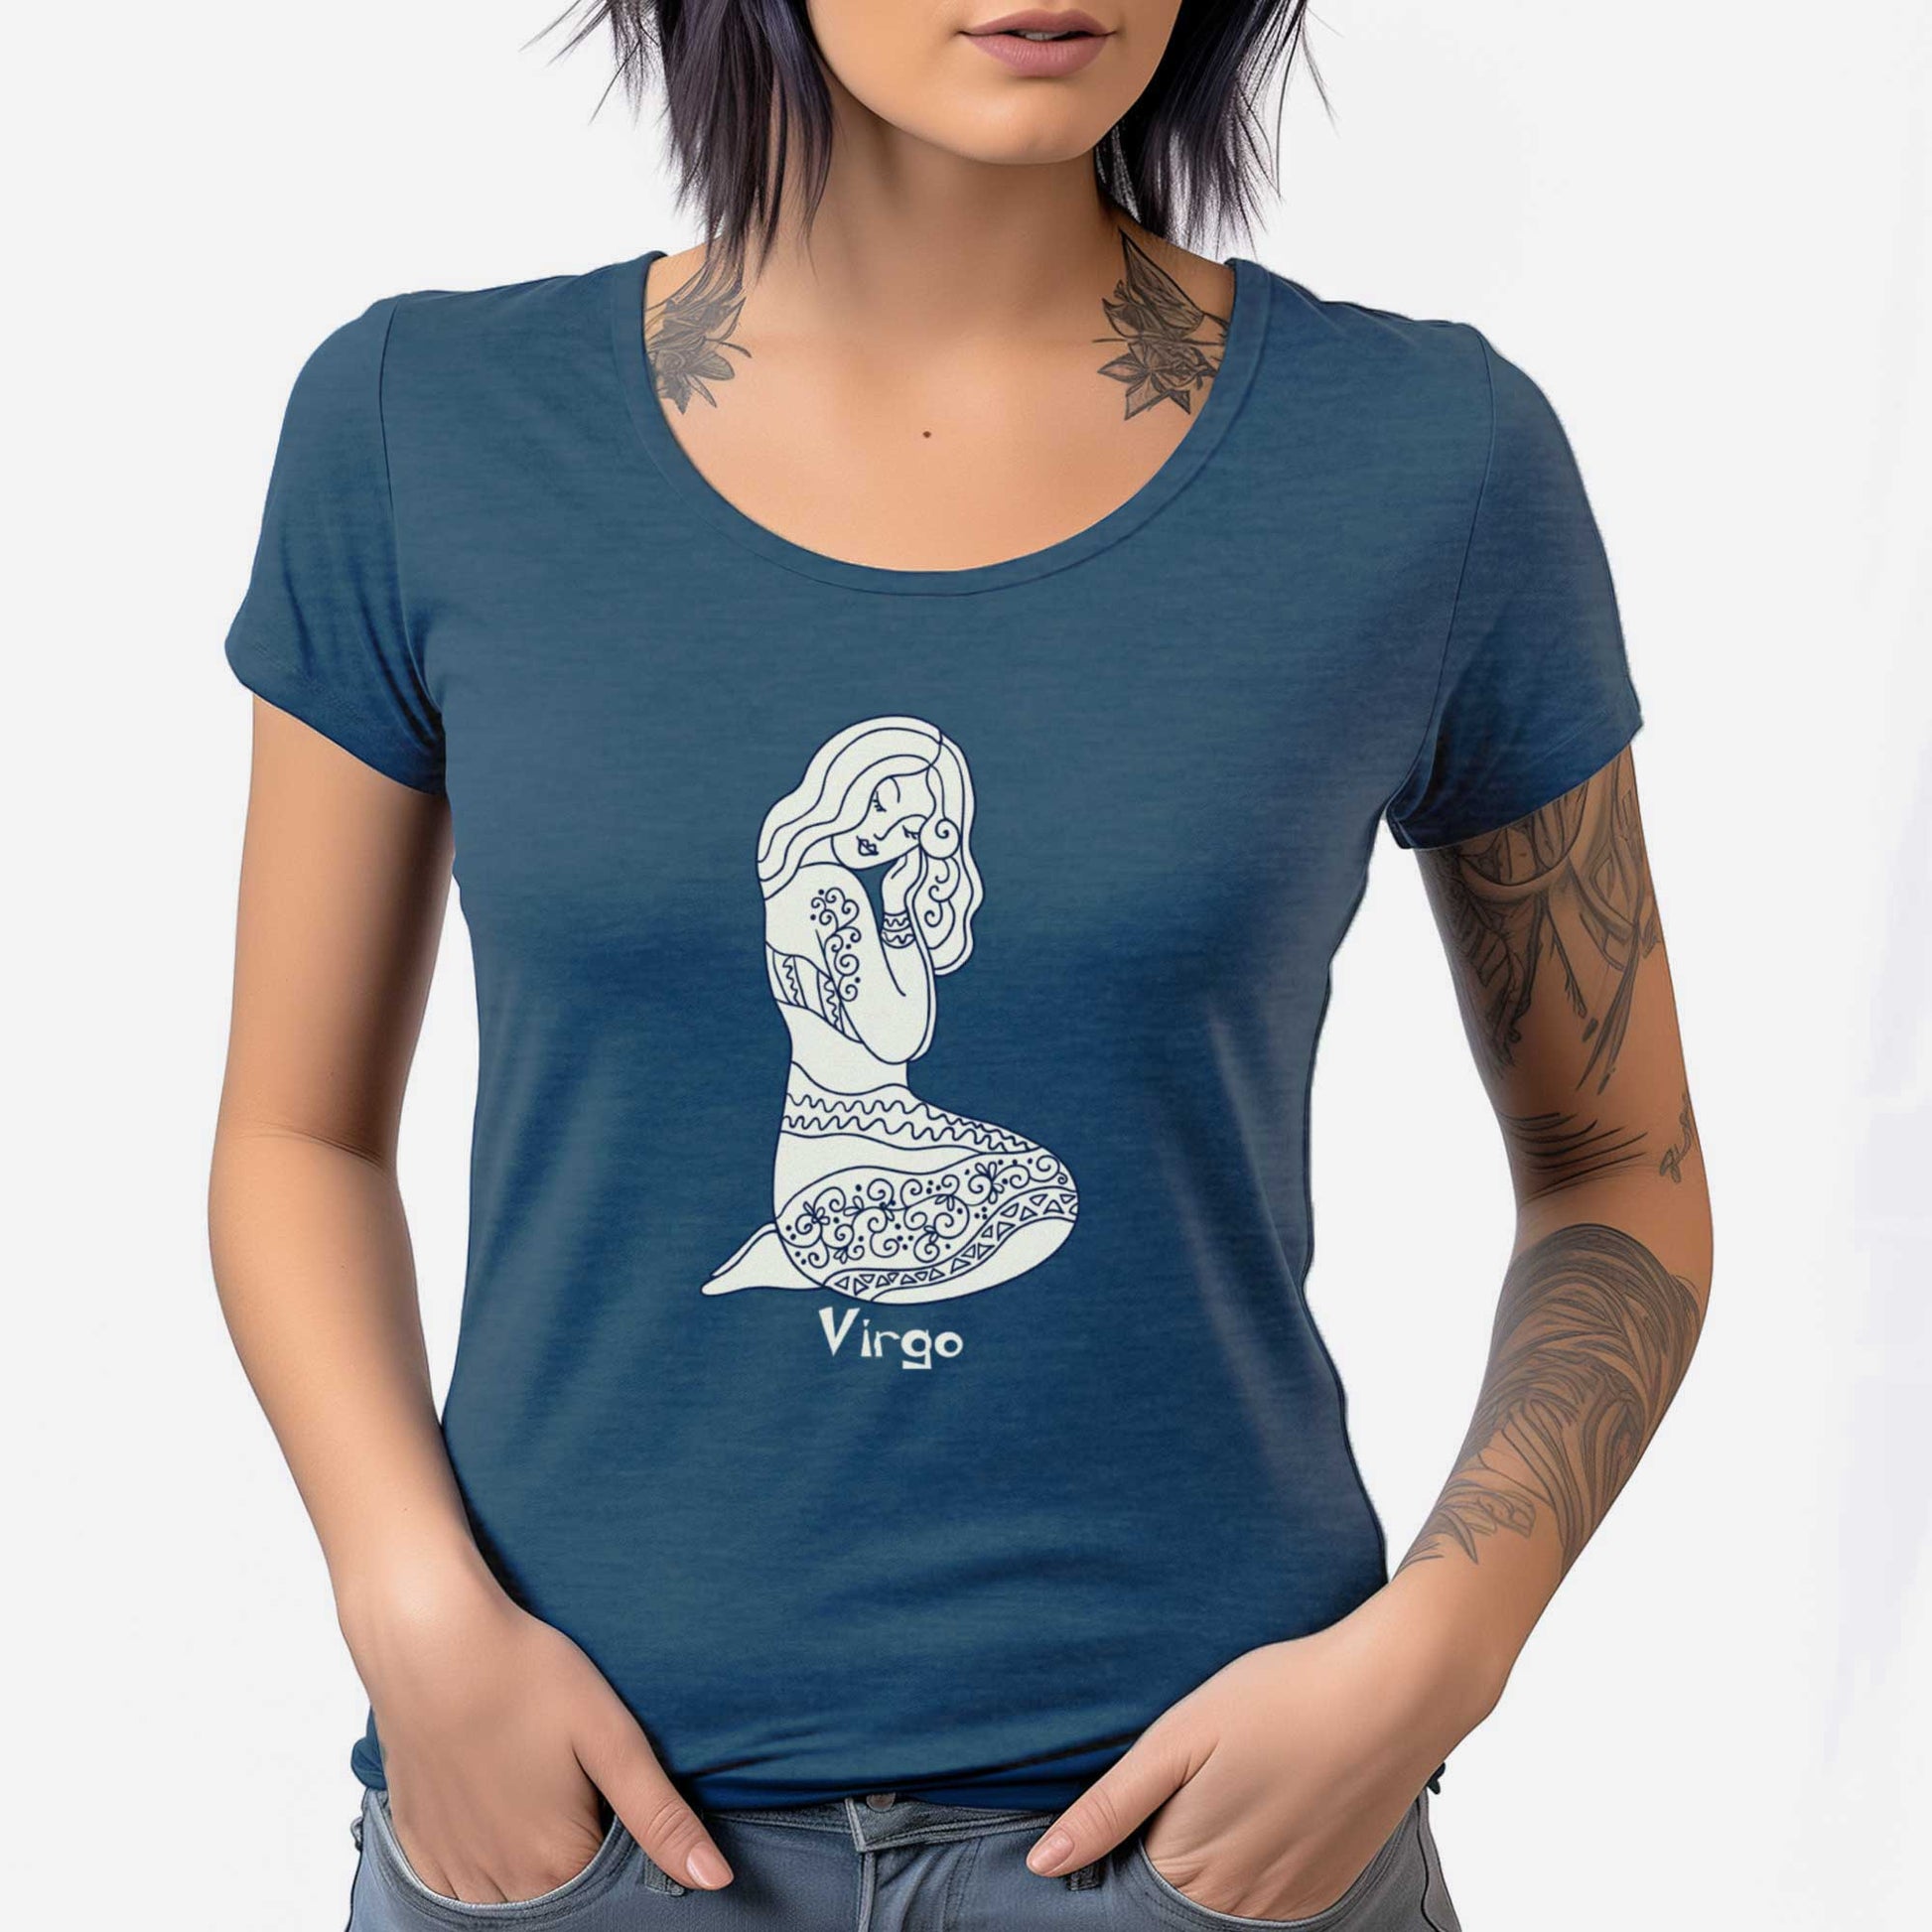 A woman wearing a heathered neptune District 7501 scoop neck t-shirt featuring the zodiac symbol of Libra, the scales, in a Mediterranean style.